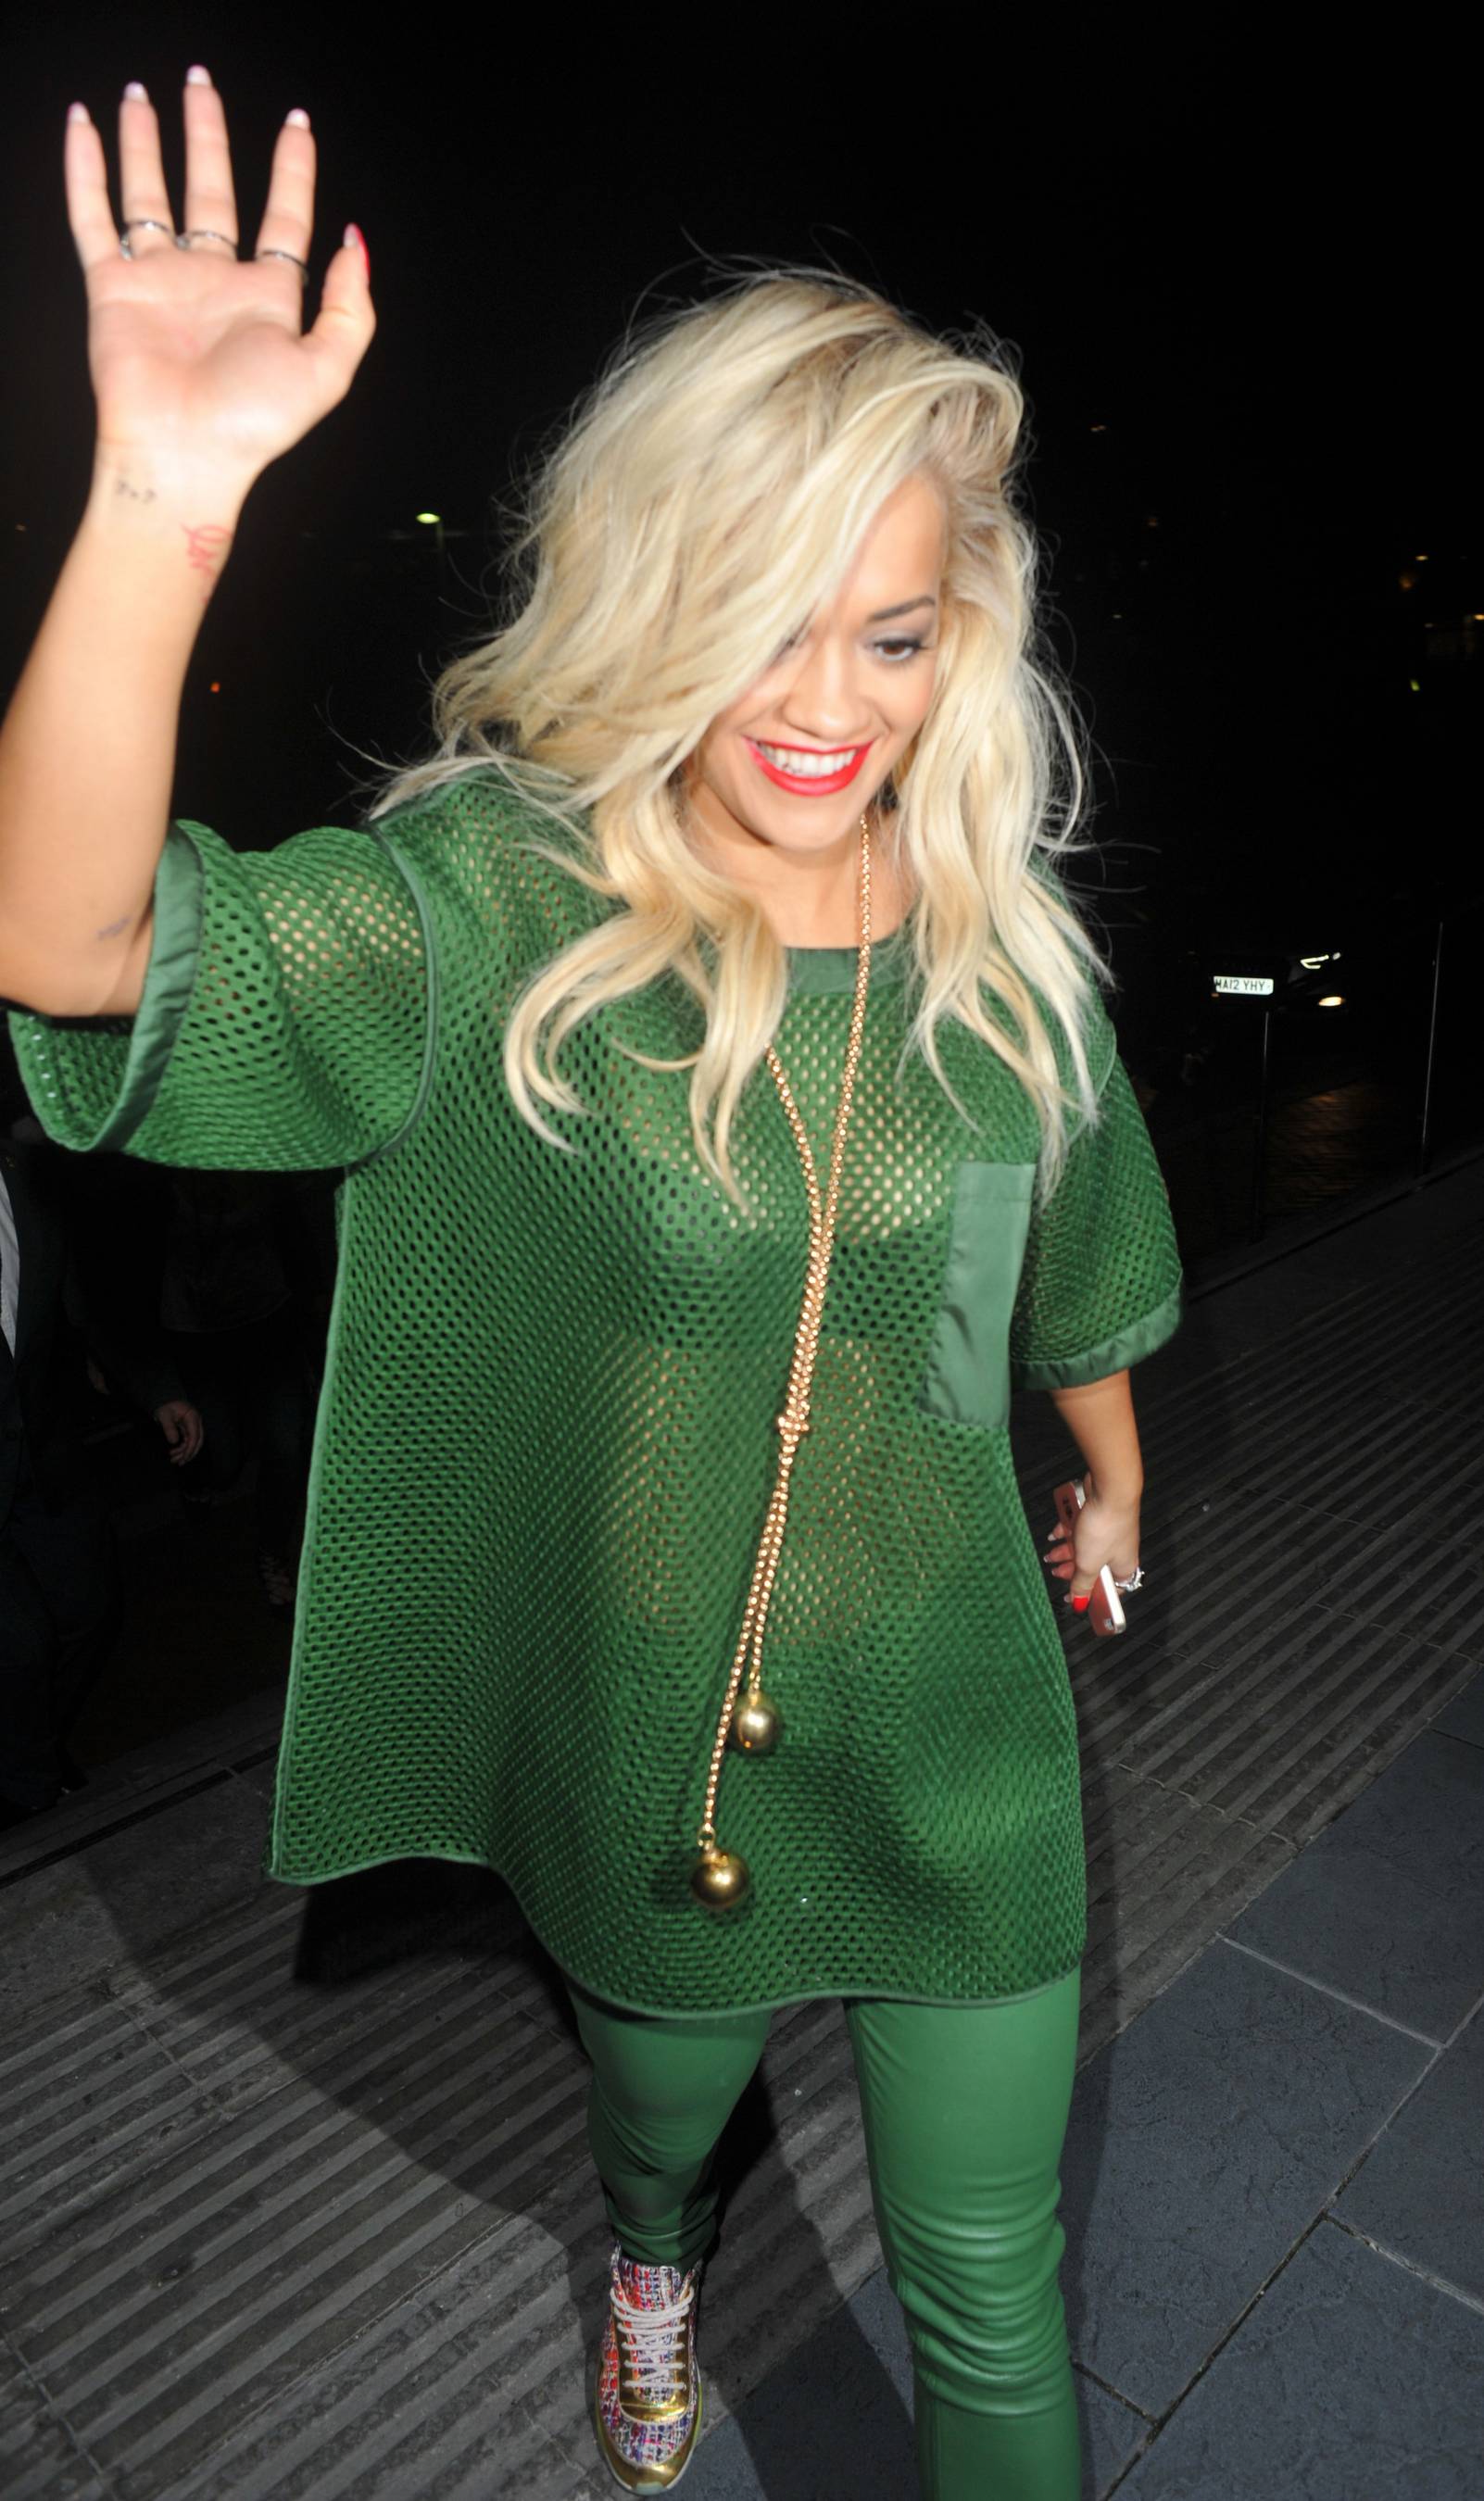 Rita Ora arrives at the Lowry Hotel in Manchester